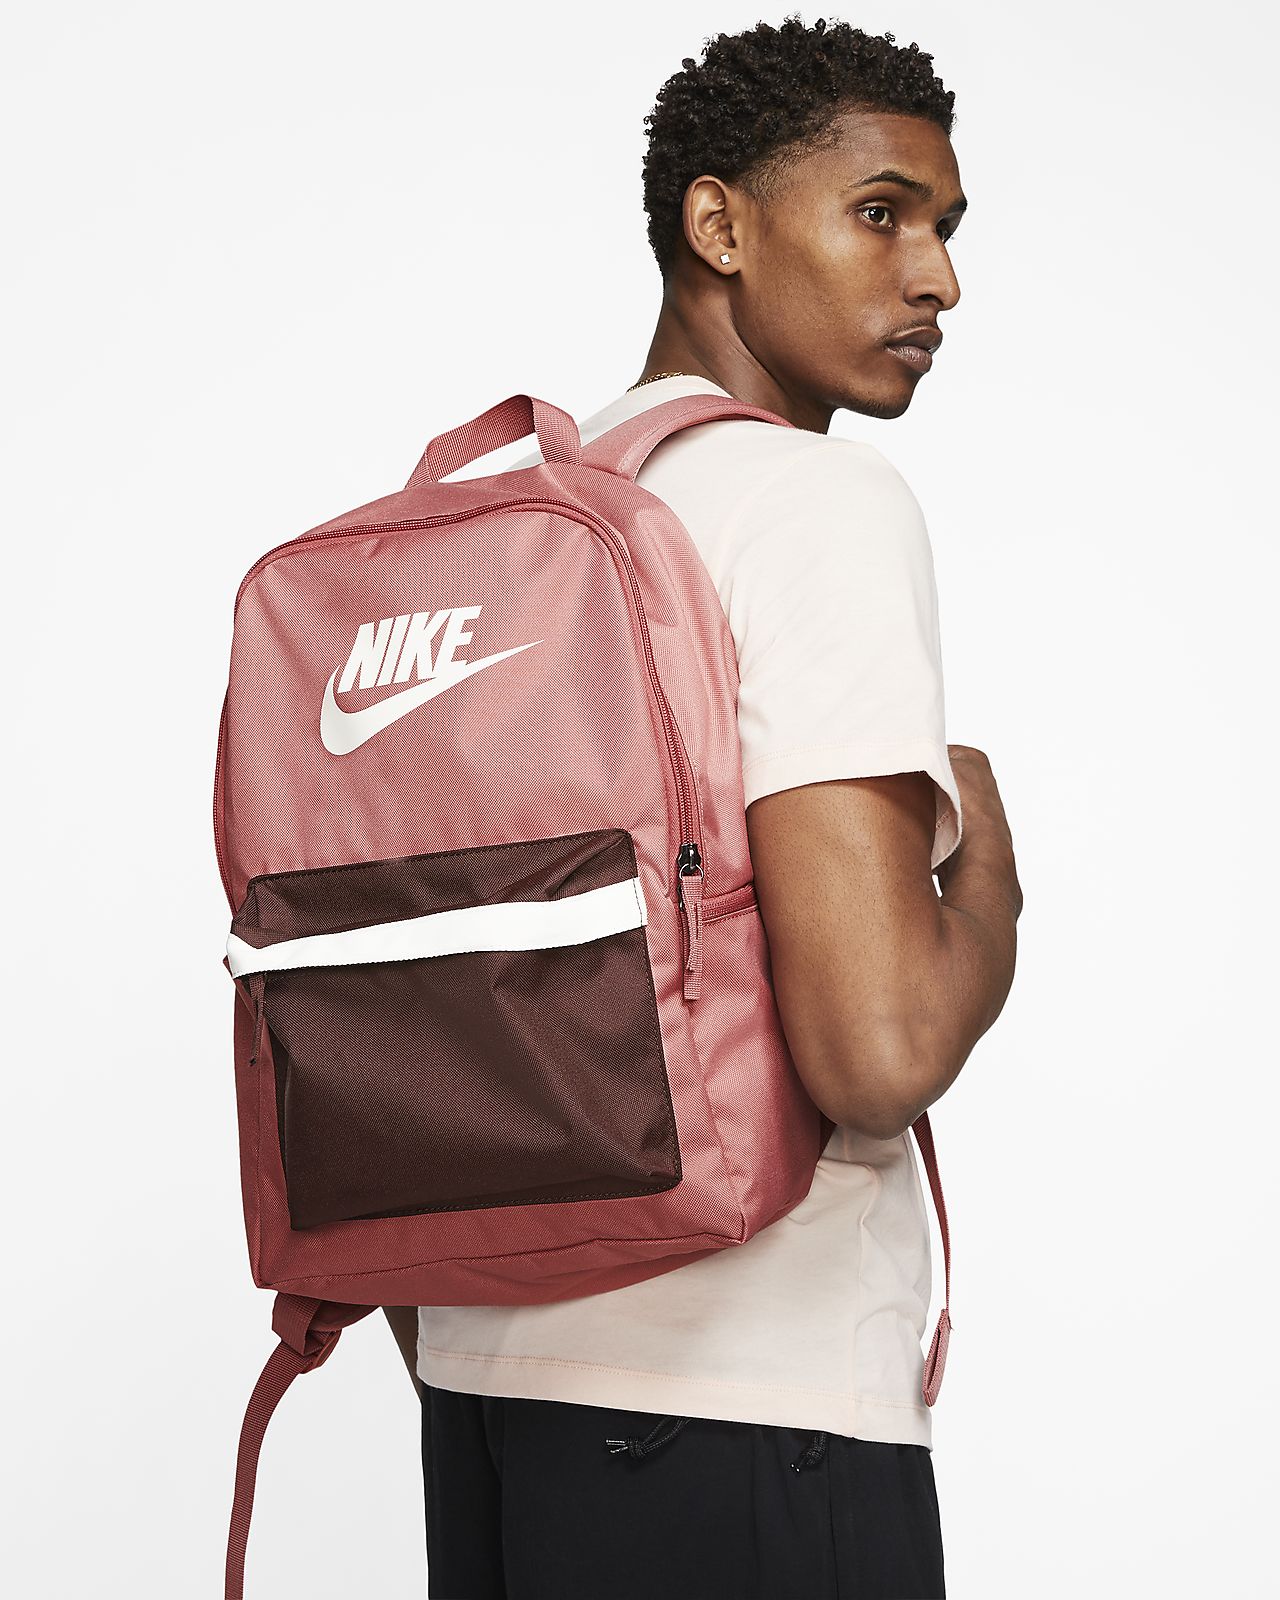 nike dance backpack authentic 25c67 47a4d